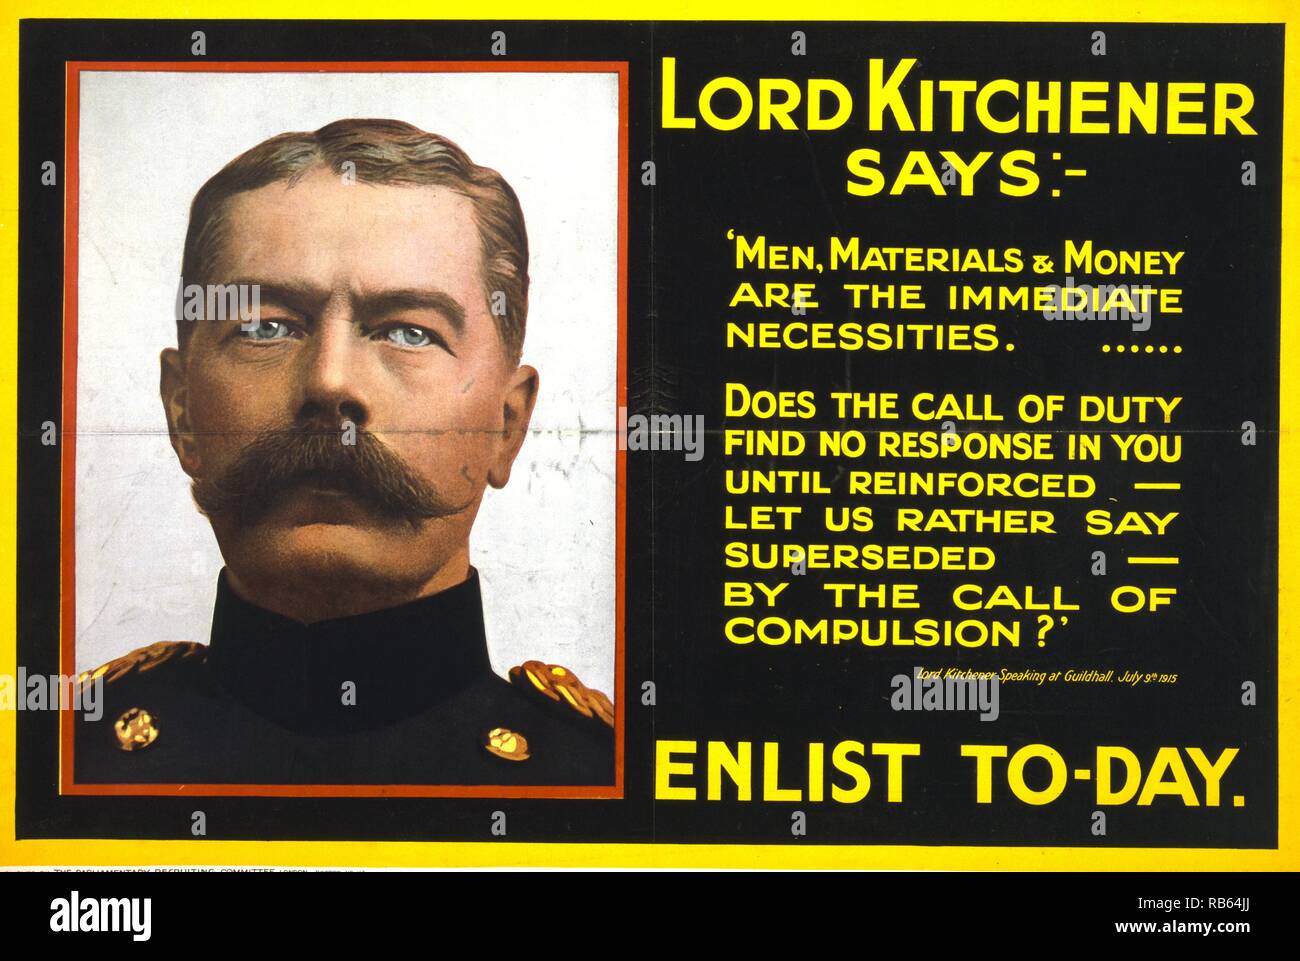 Lord Kitchener says: Enlist to-day. Poster issued by the British Parliamentary Recruiting Committee, 1915 Stock Photo